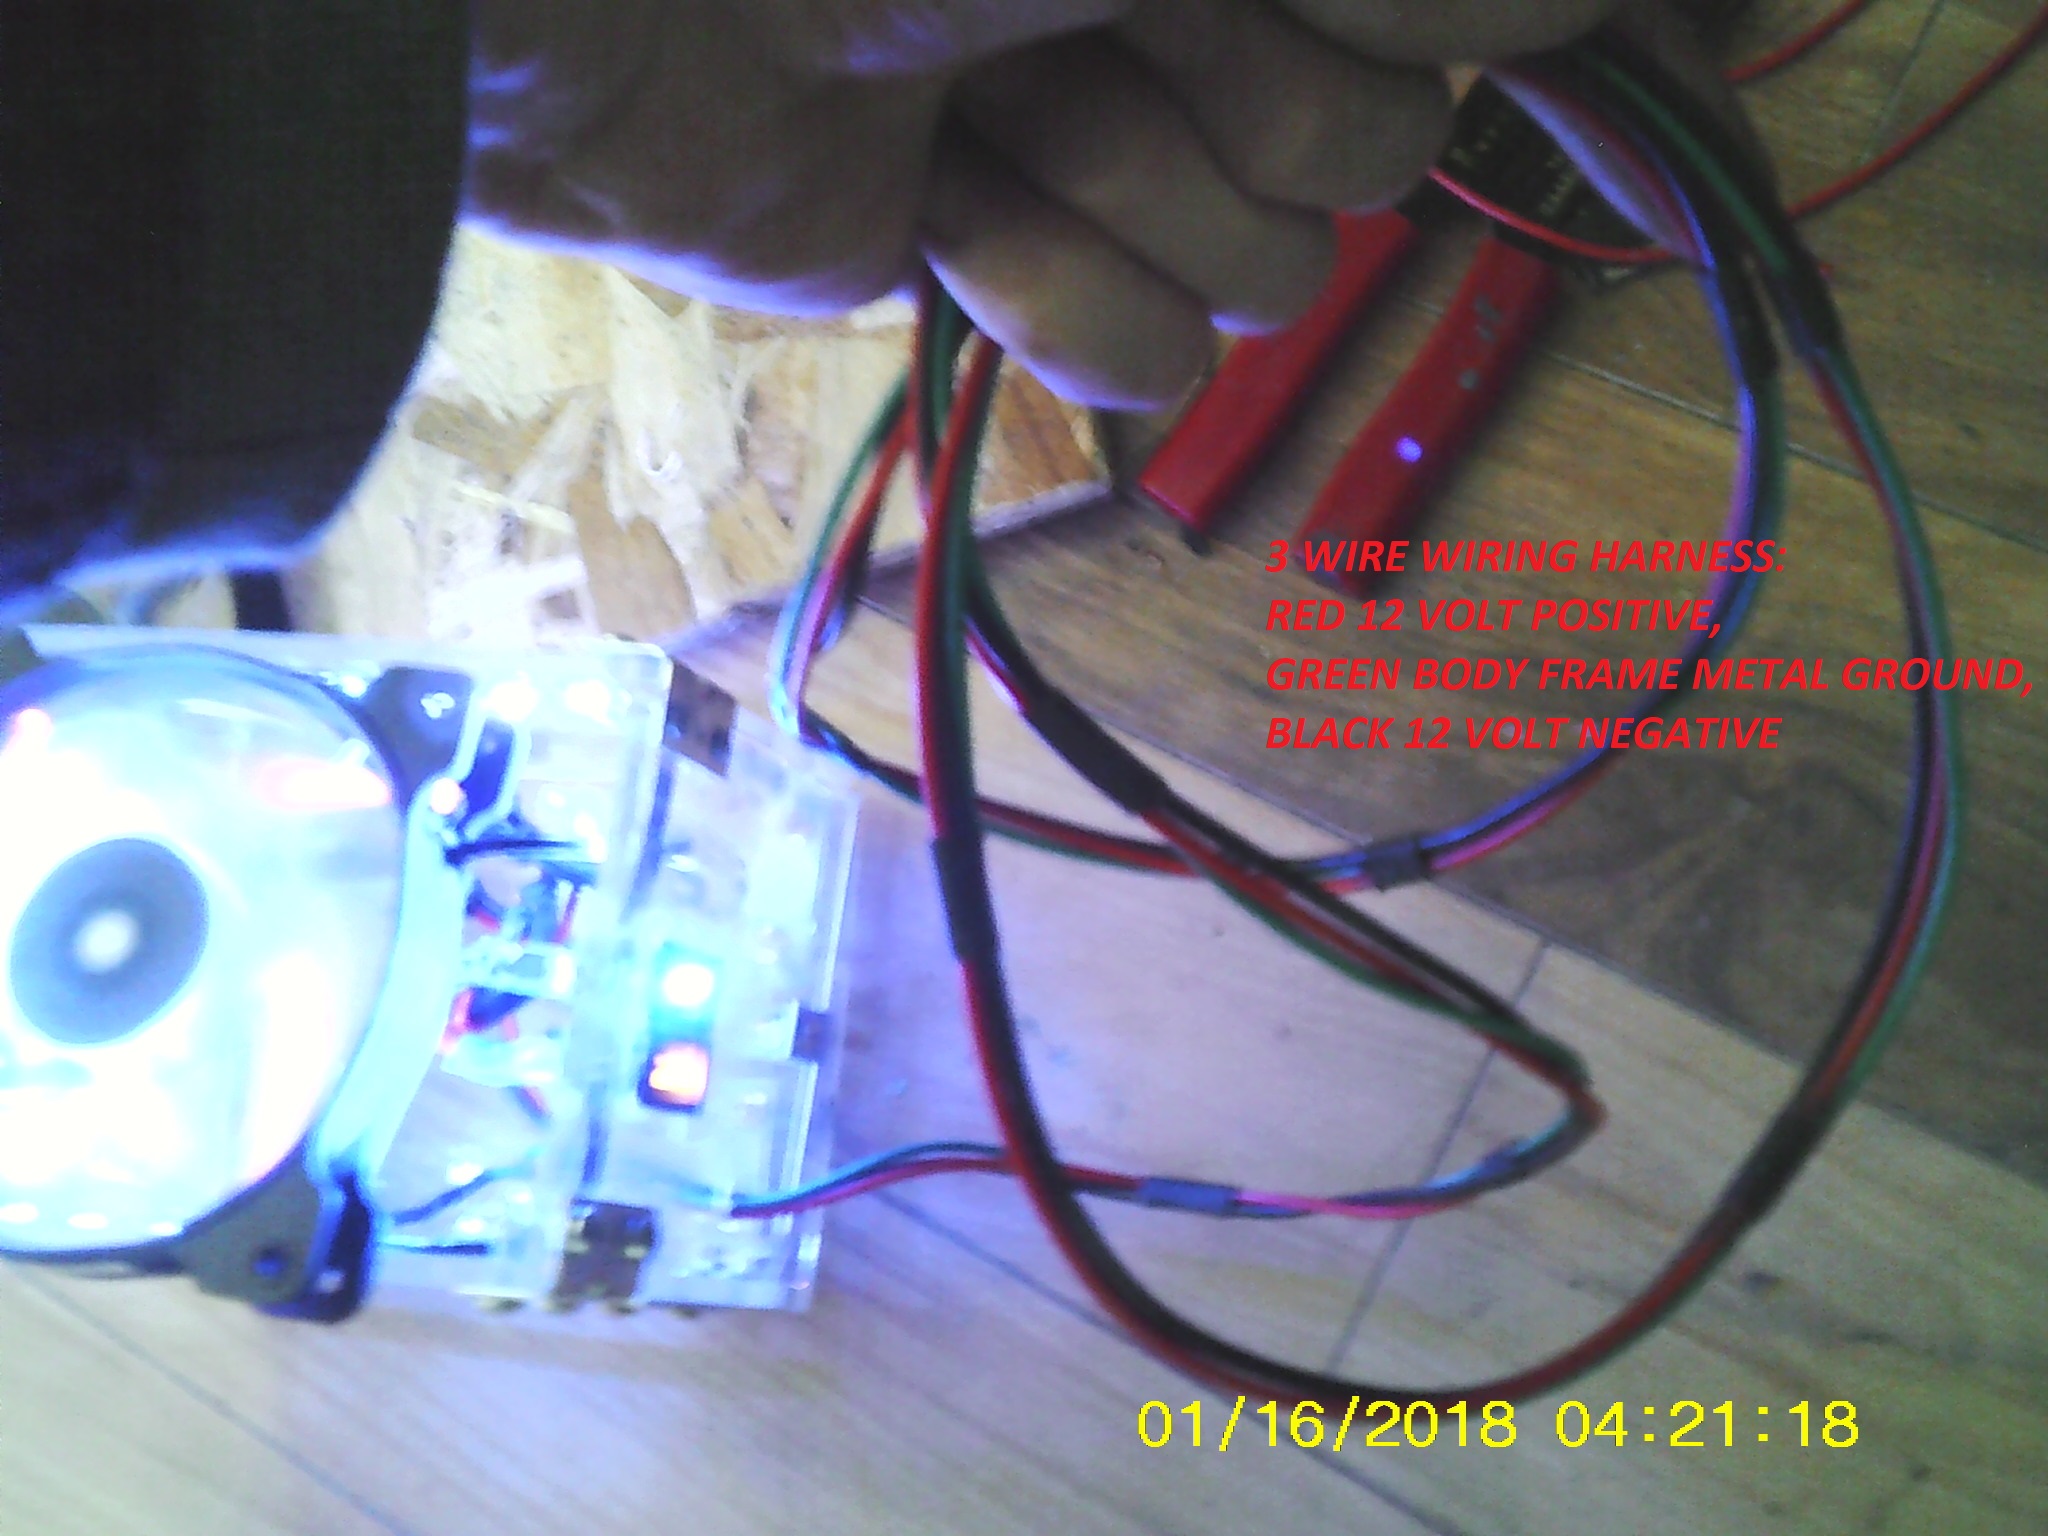 3 WIRE WIRING HARNESS WRITING ADDED TO POWER INVERTER WITH WIRE HARNESS IN MY HAND